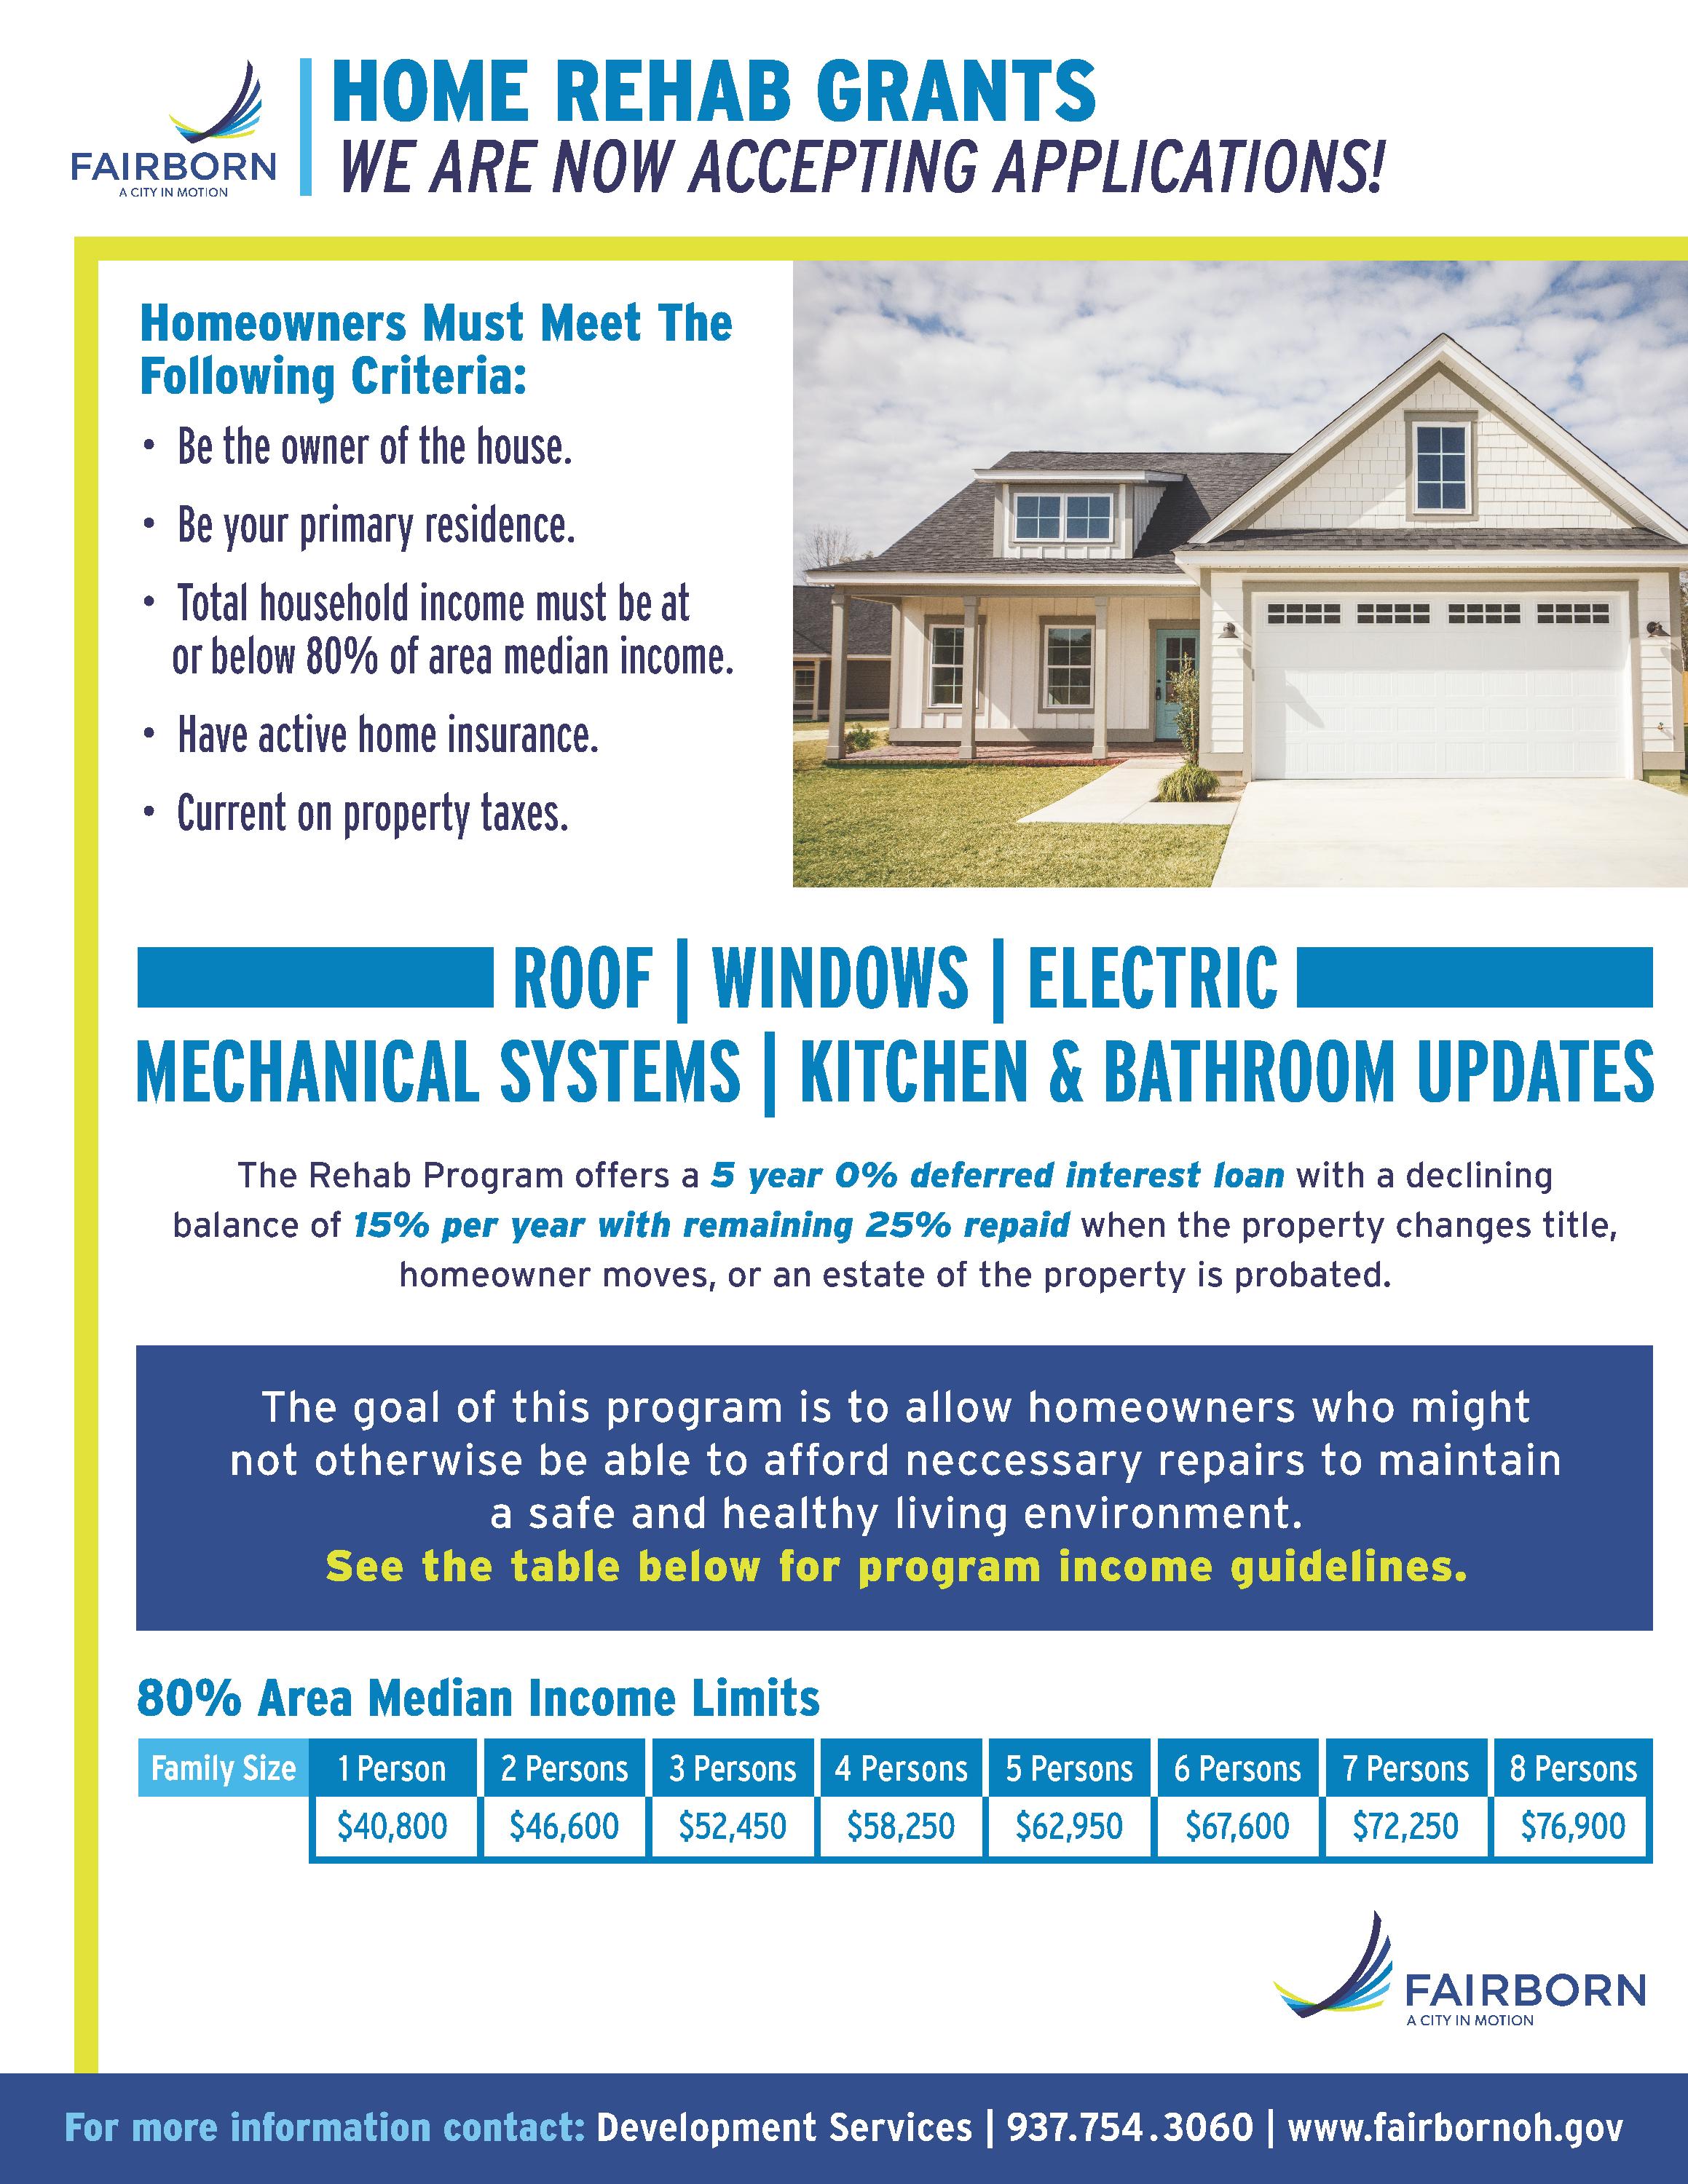 Home Rehab Grants Flyer_Revised2